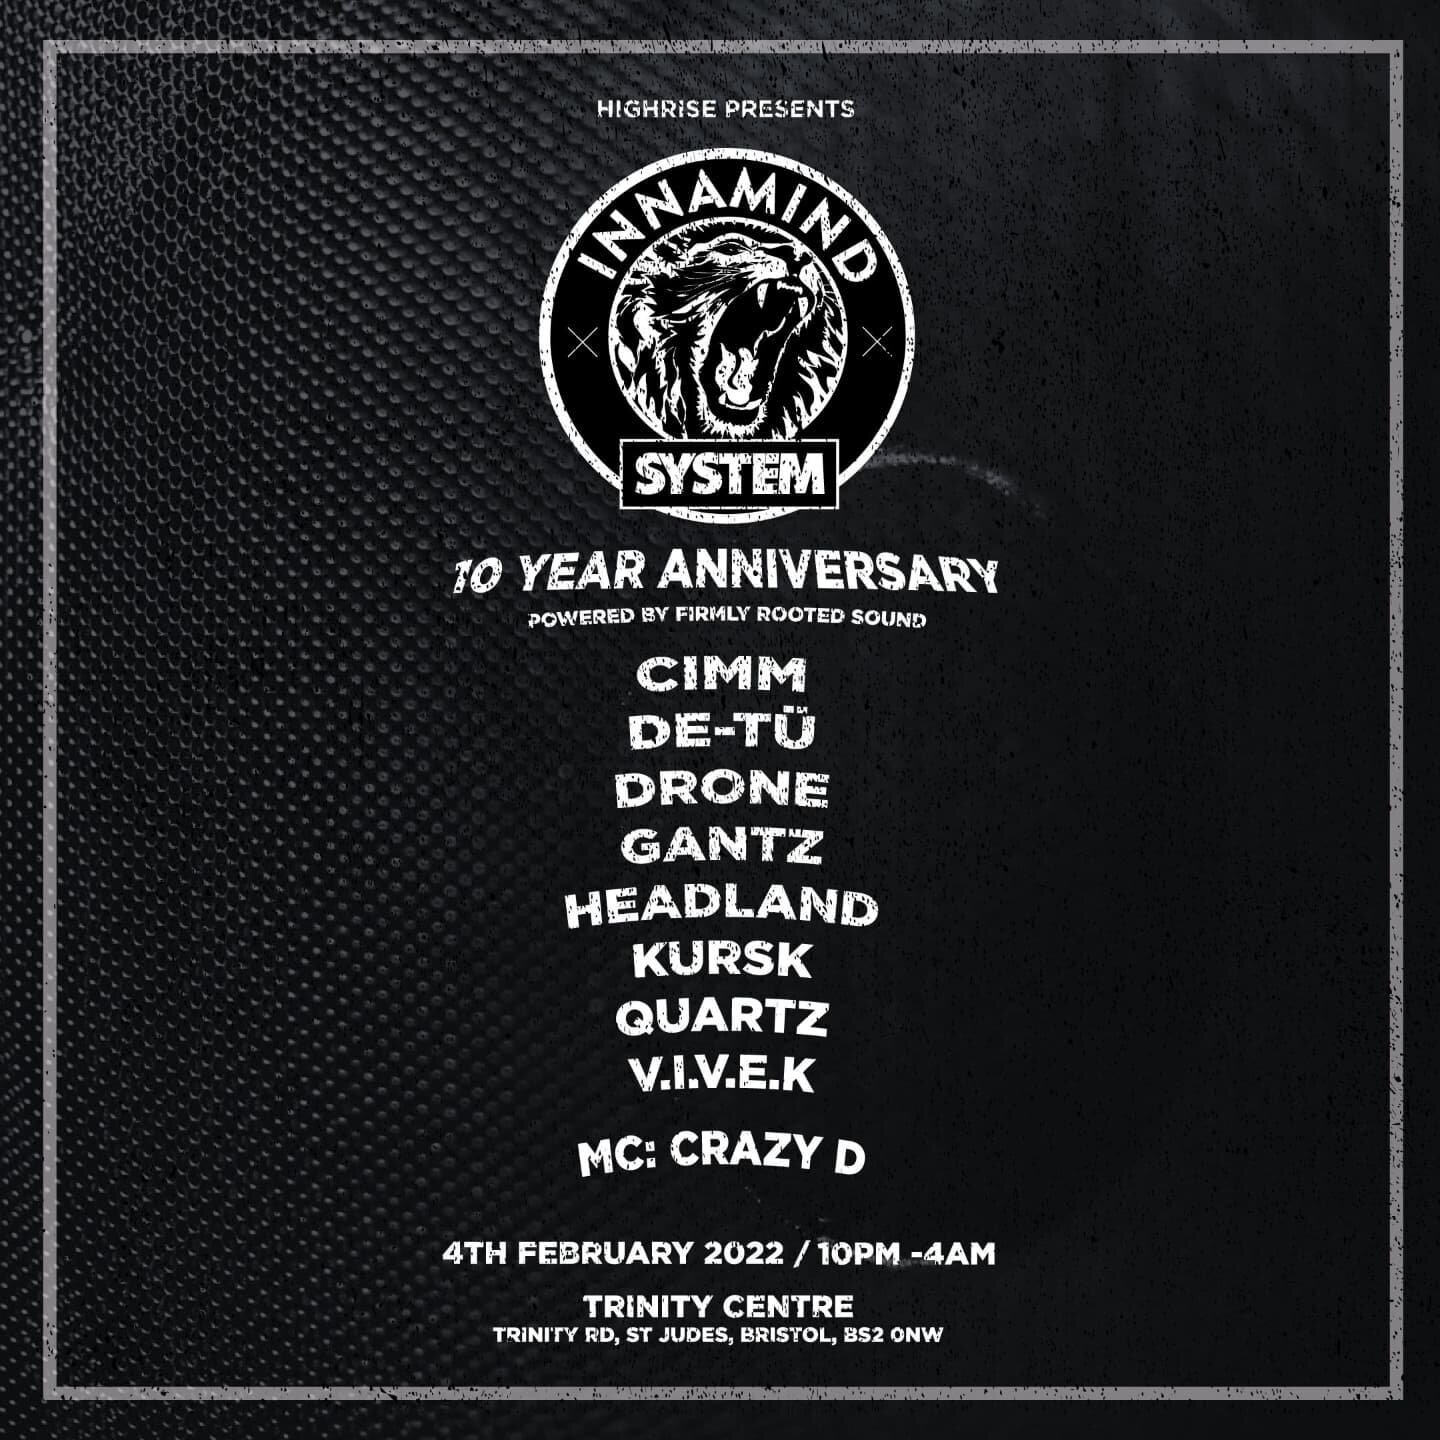 Look at this crew of Legends! Big up @systemmusicuk and @innamindrecs everytime. Link in the bio 💨💨💨

Big up @viveksystem and @jez_imr for the decade of solid graft 👑👑

Lineup: @detuuuu @drone_uk @gantzzu @headlandbeats @jez_imr @quartzmusic @vi